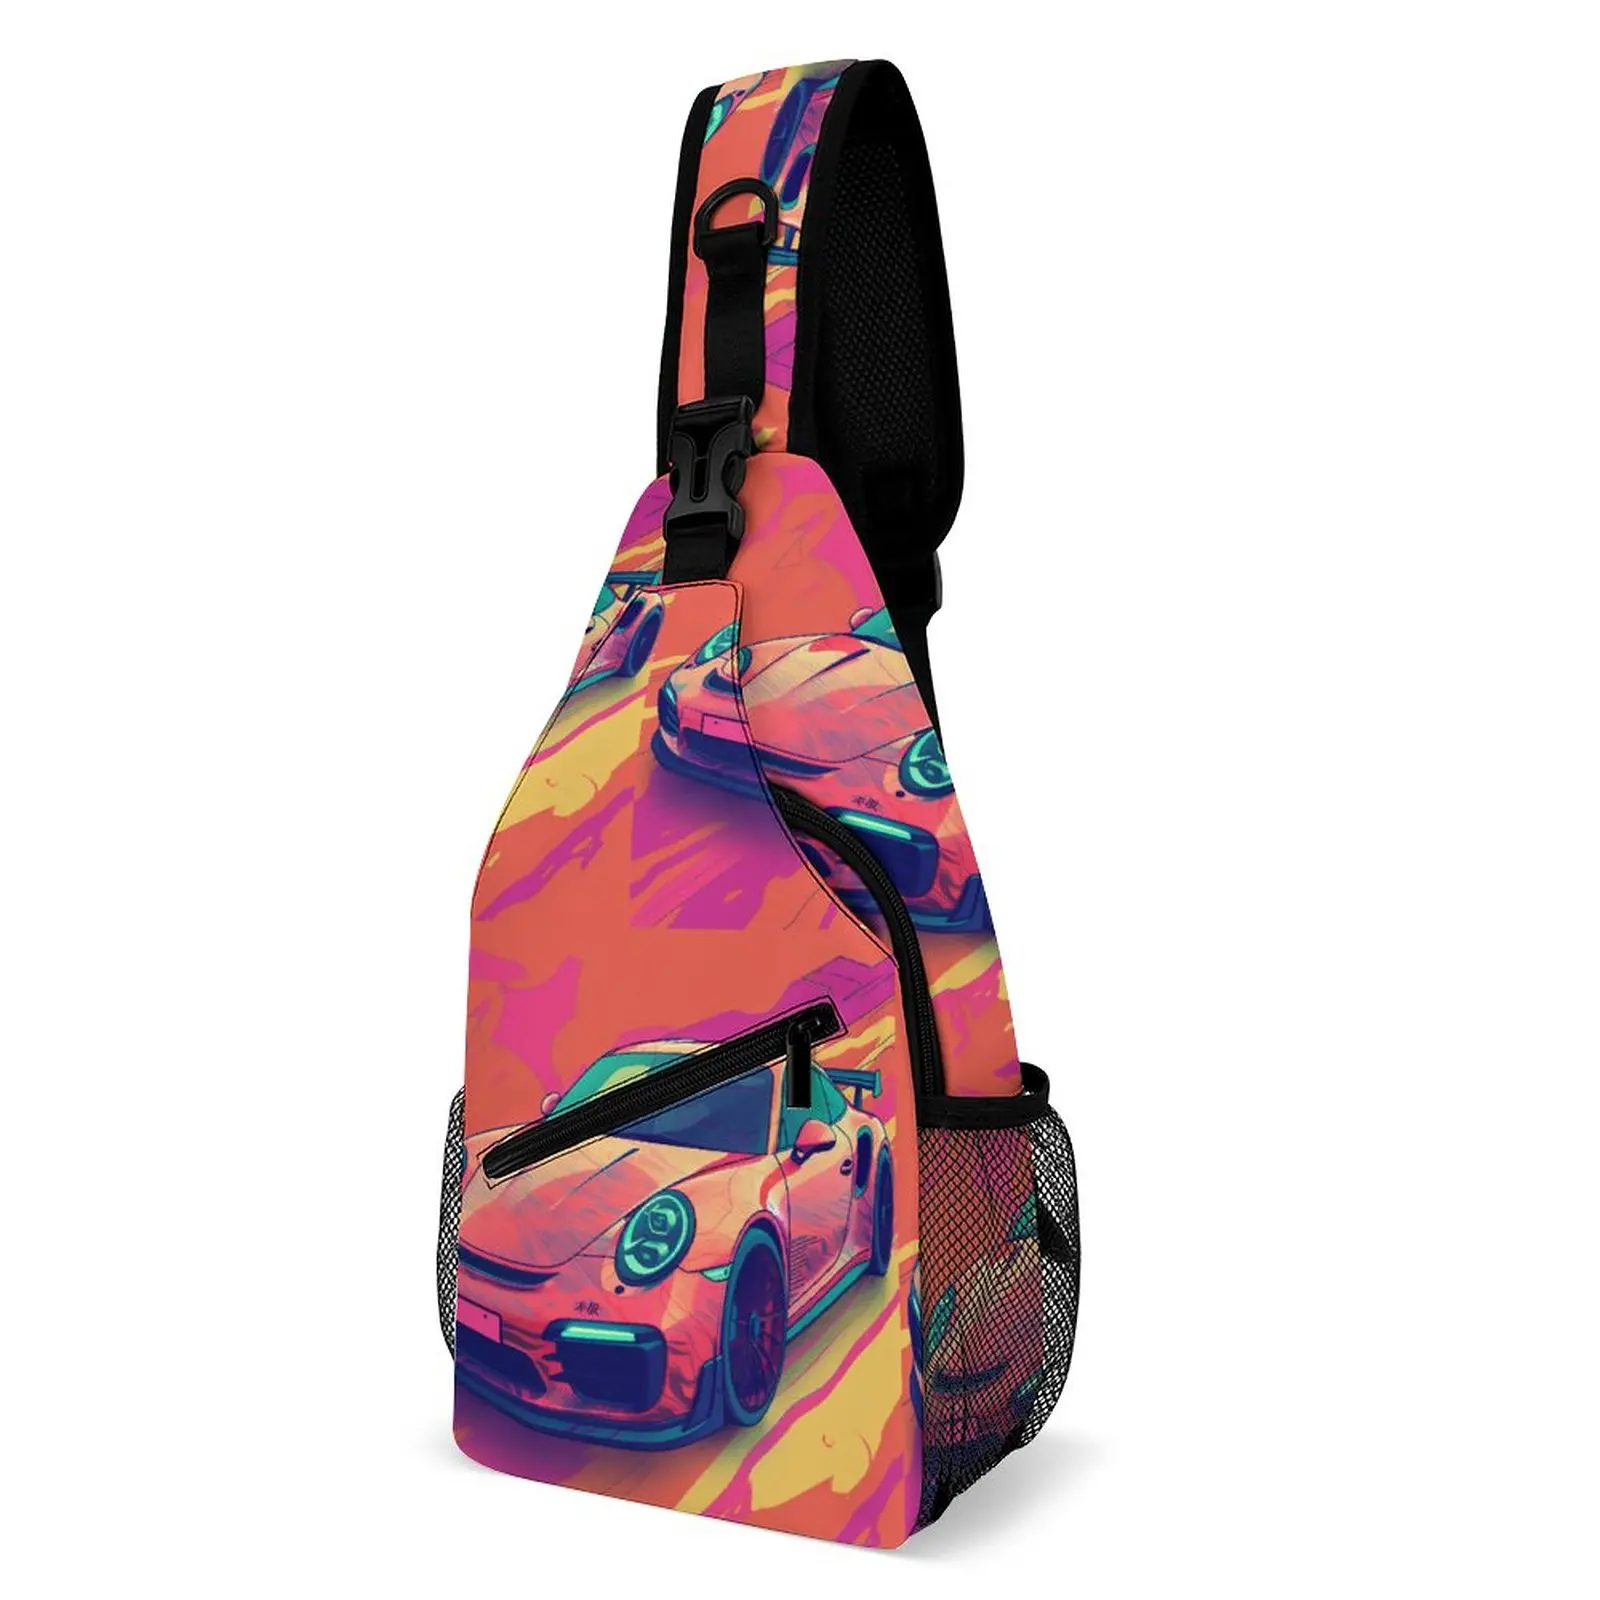 

Sports Car Chest Bags Neo Fauvism Cover Art Print Shoulder Bag Aesthetic School Crossbody Bag Sports Outdoor Style Sling Bags